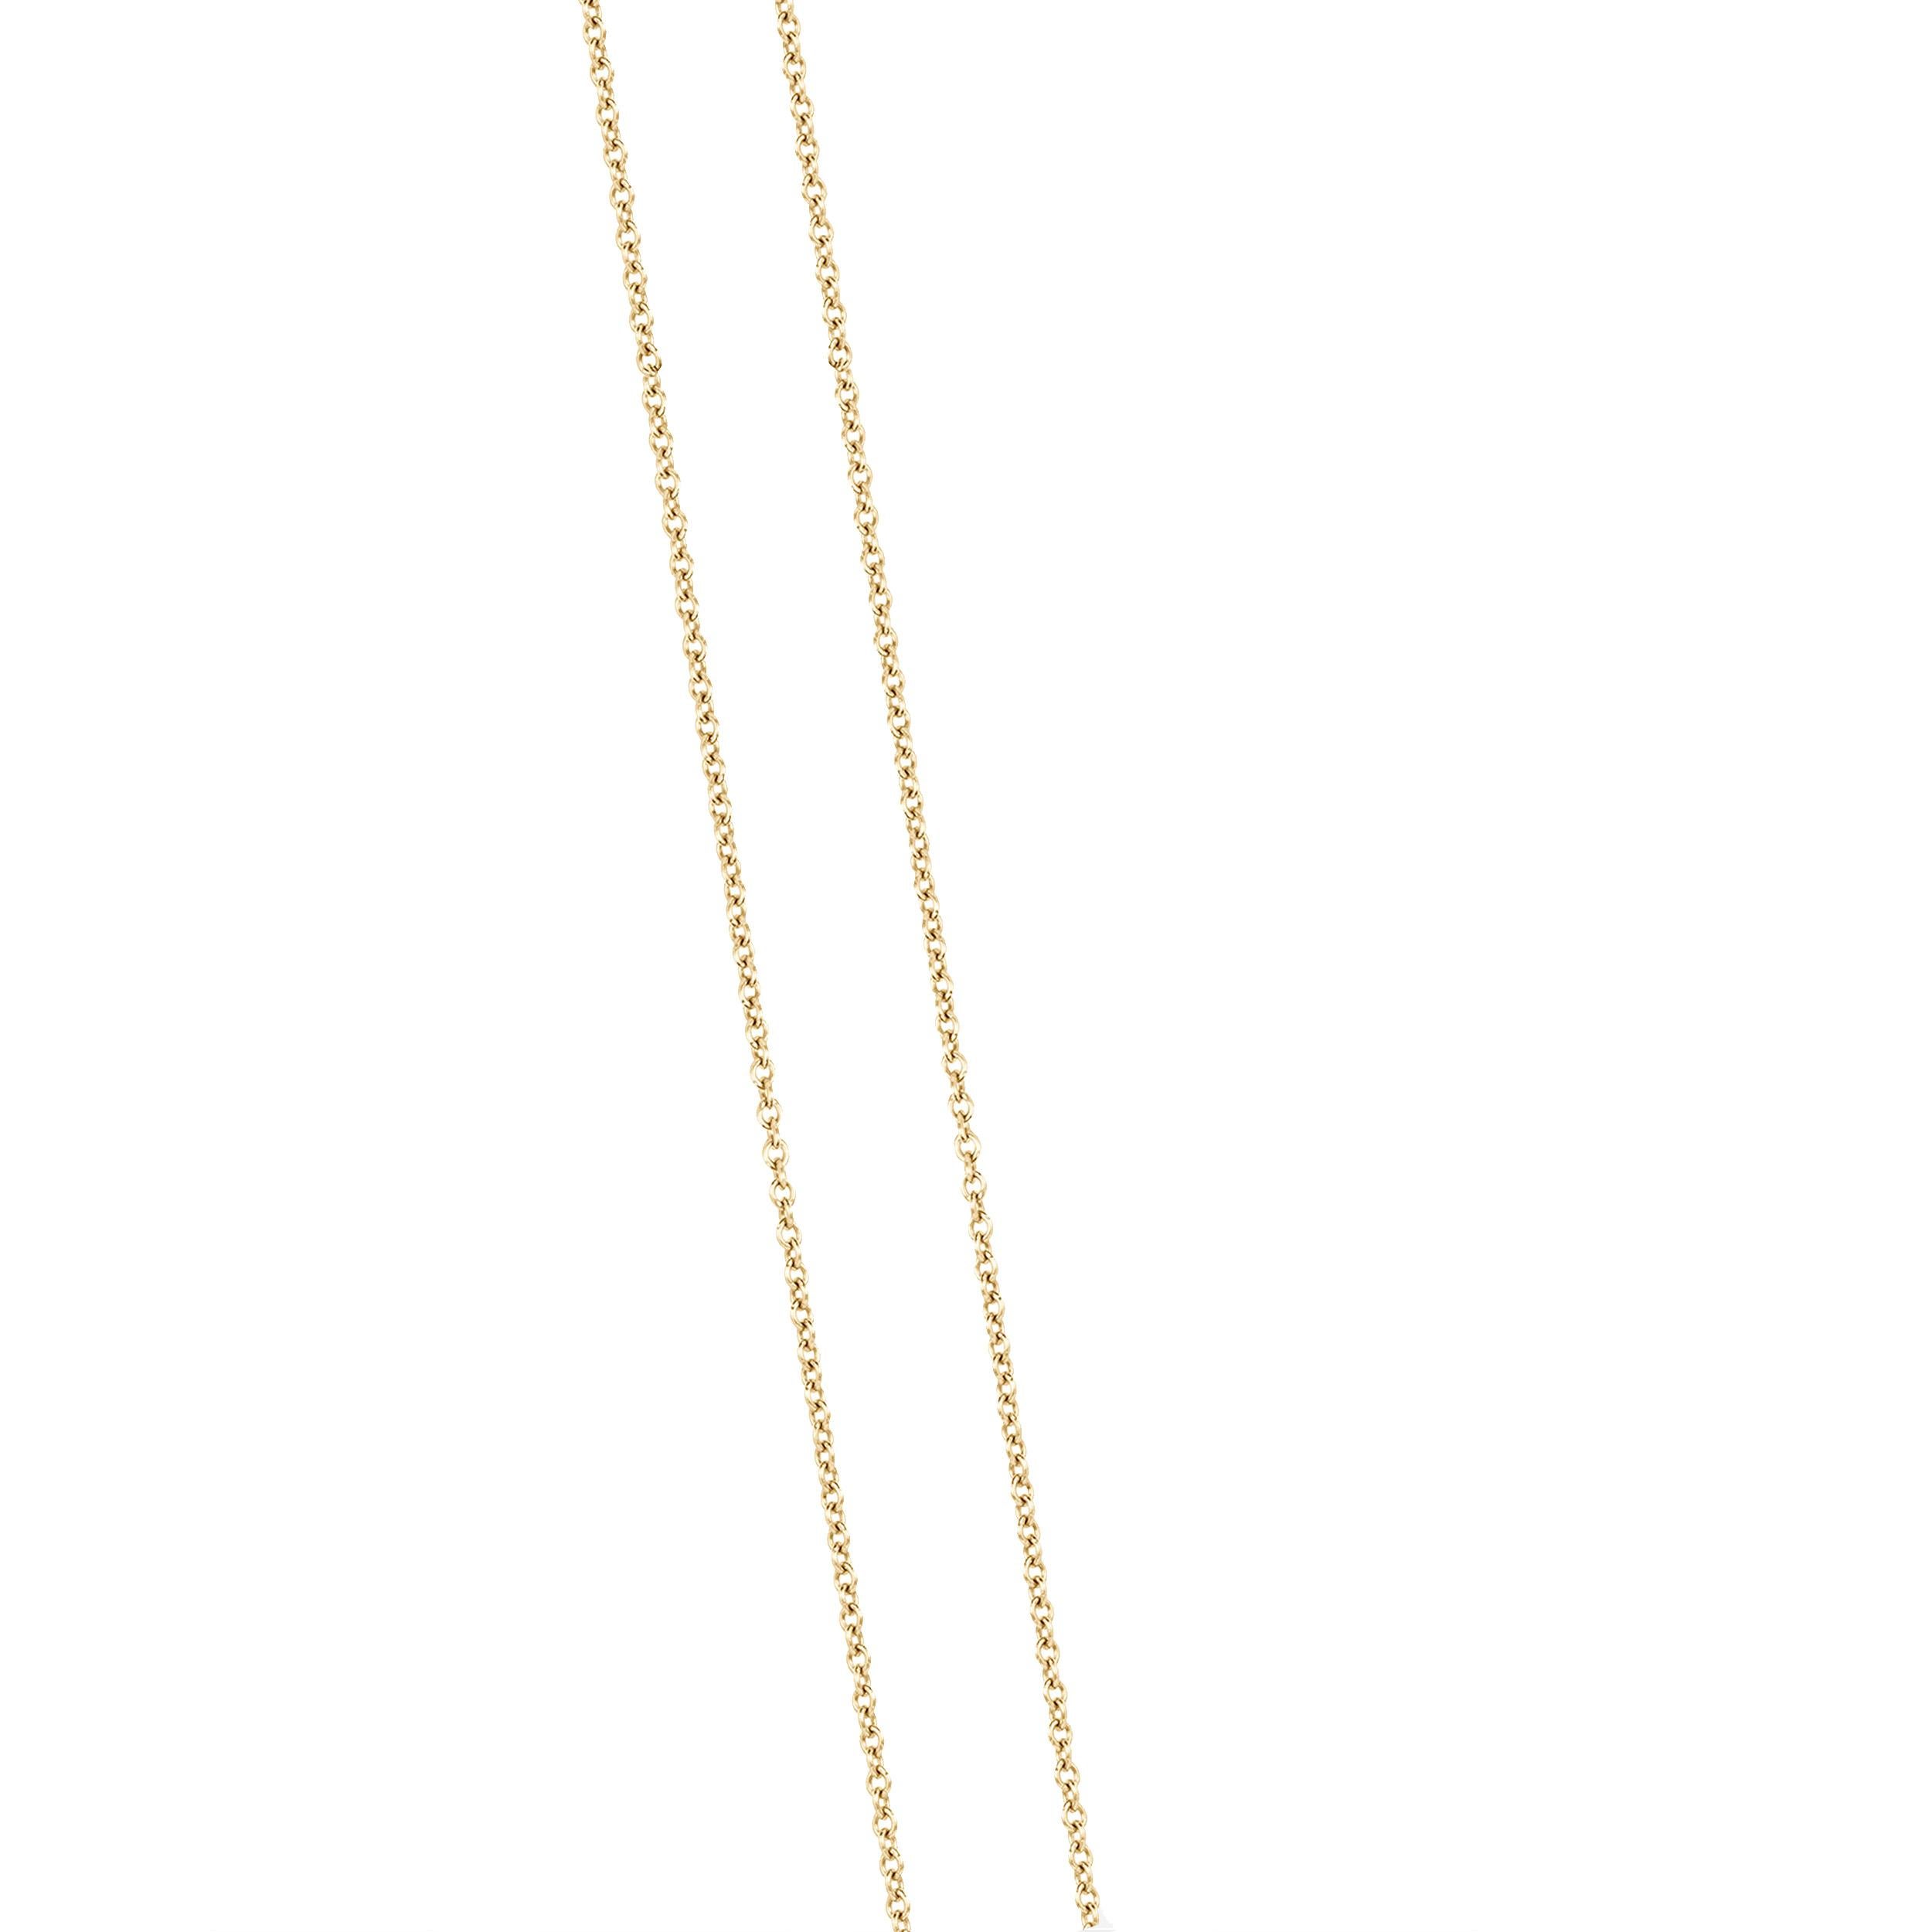 30'' Chain with Lobster clasp. in 18K Yellow Gold
 
Available in Yellow, White and Rose Gold